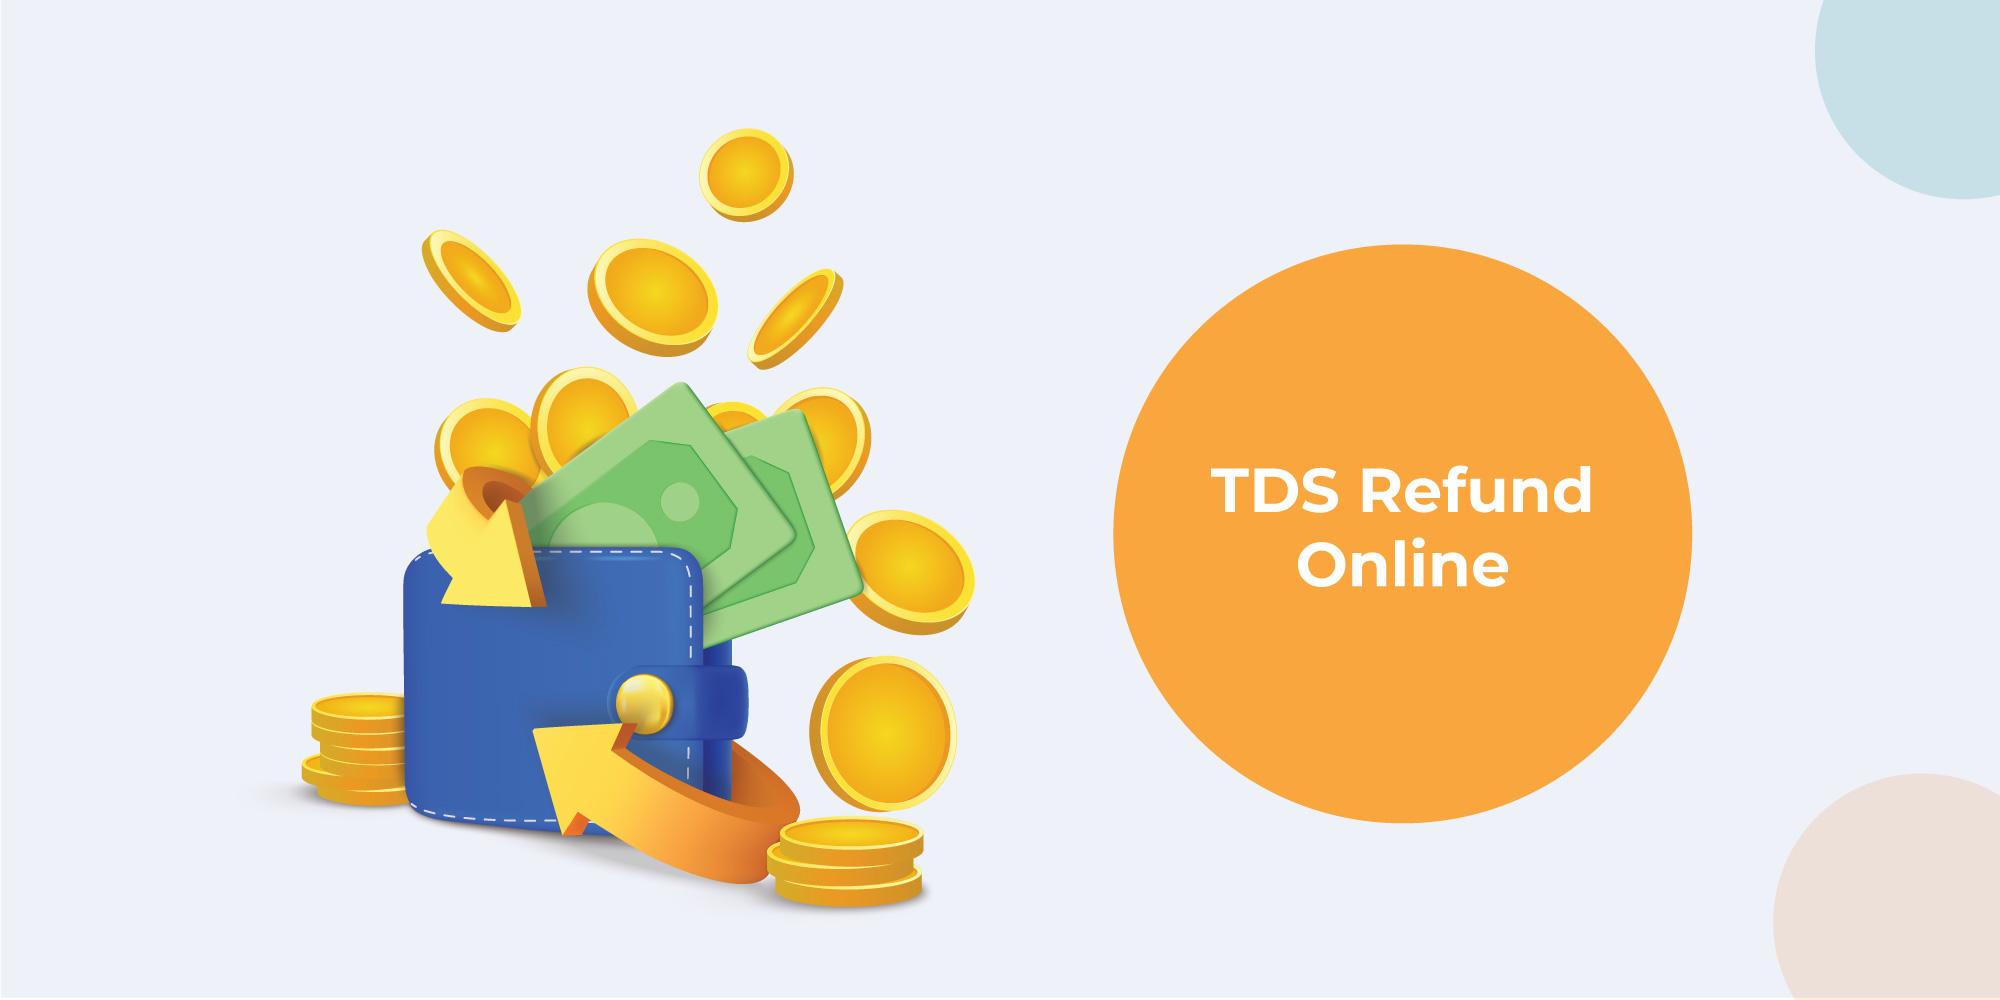 How to claim income tax refund online for TDS: Important pointers